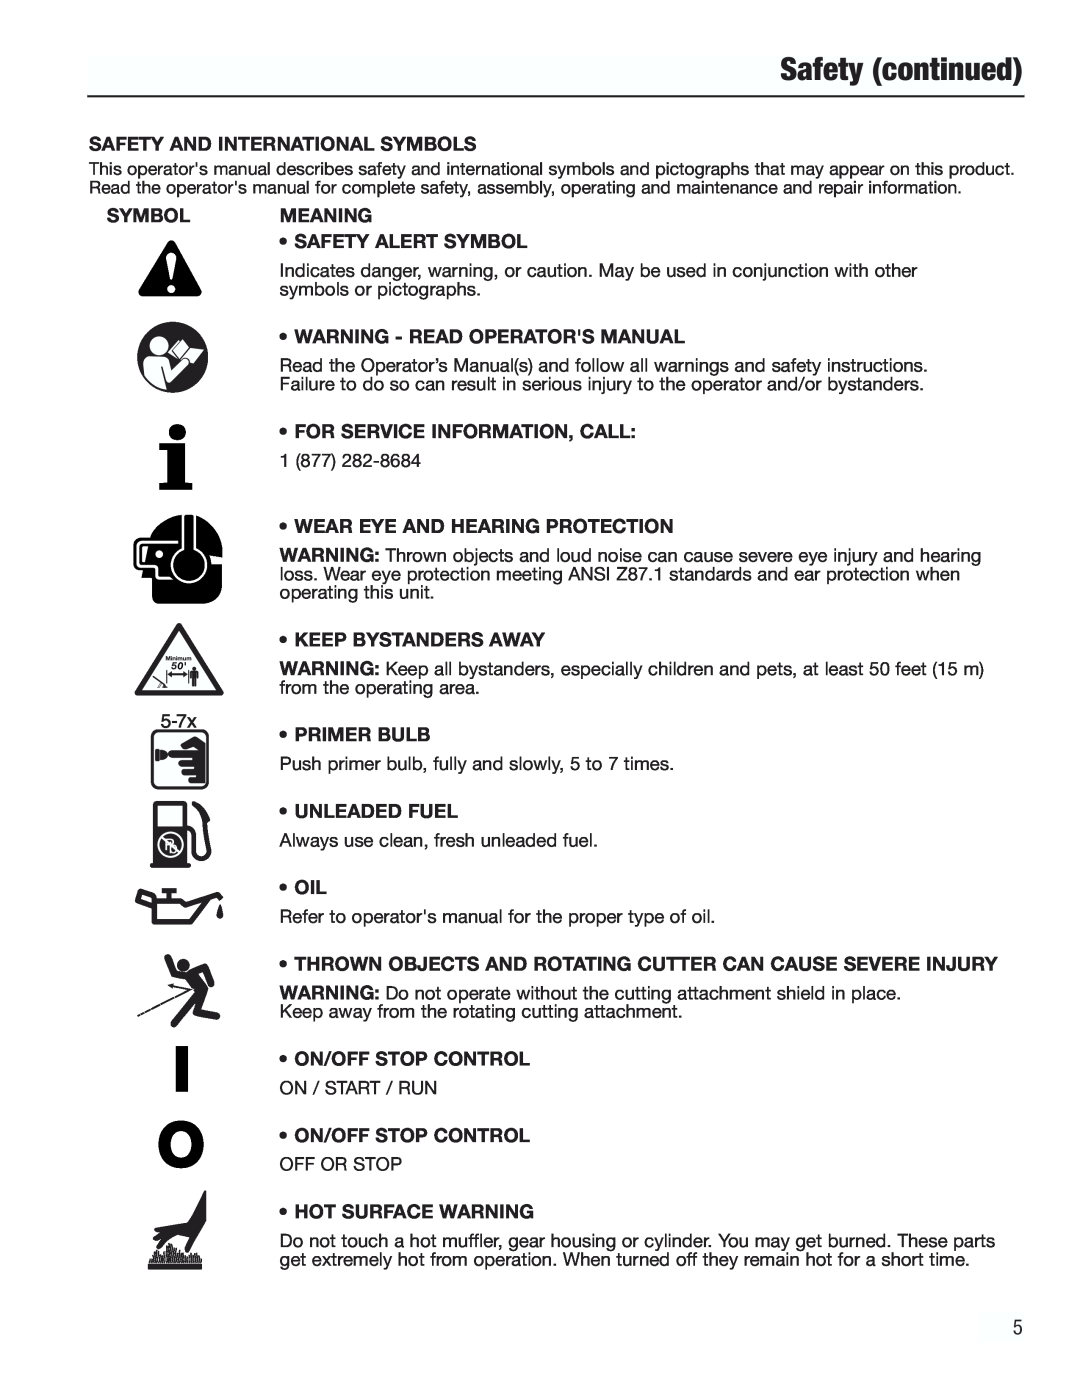 Cub Cadet CC3000 manual Safety continued, Safety And International Symbols 